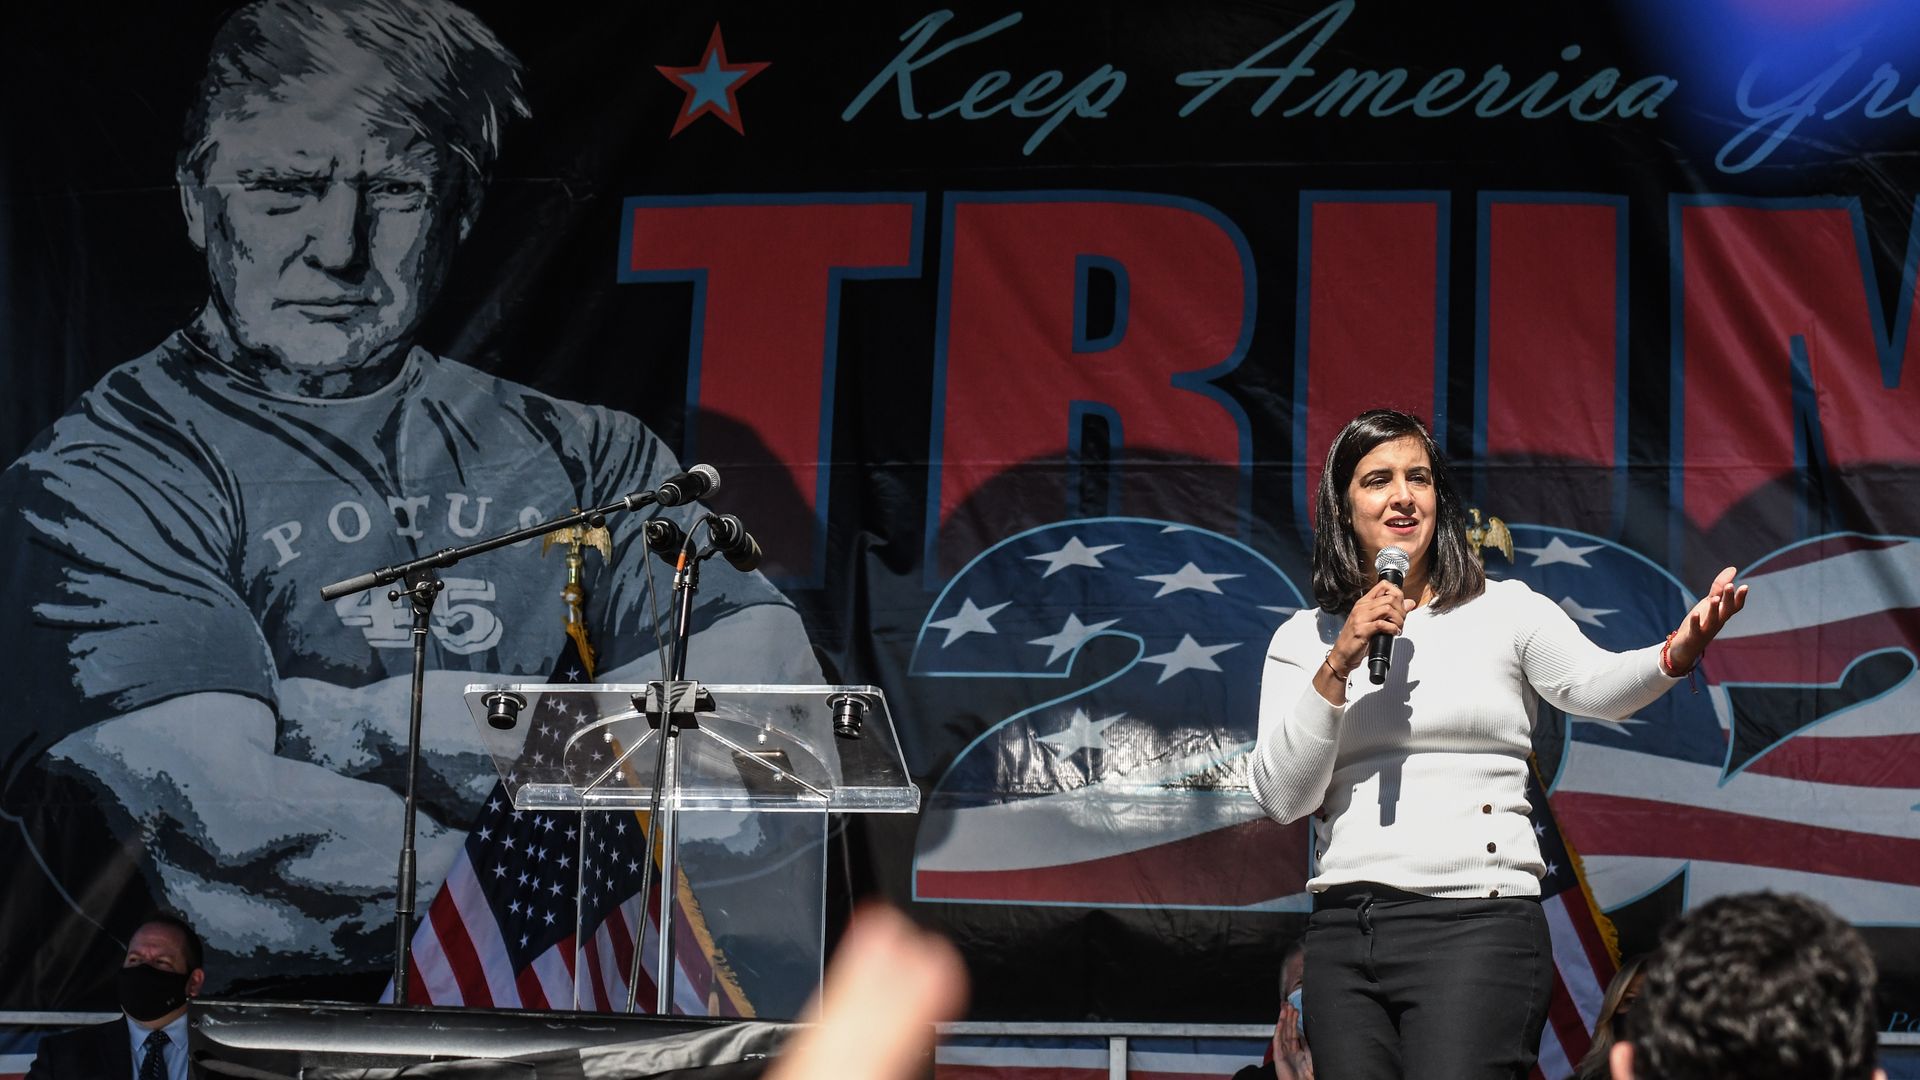 Nicole Malliotakis, then-New York State assemblywoman, speaks during a pro-Trump rally on October 3, 2020 in the borough of Staten Island in New York City.